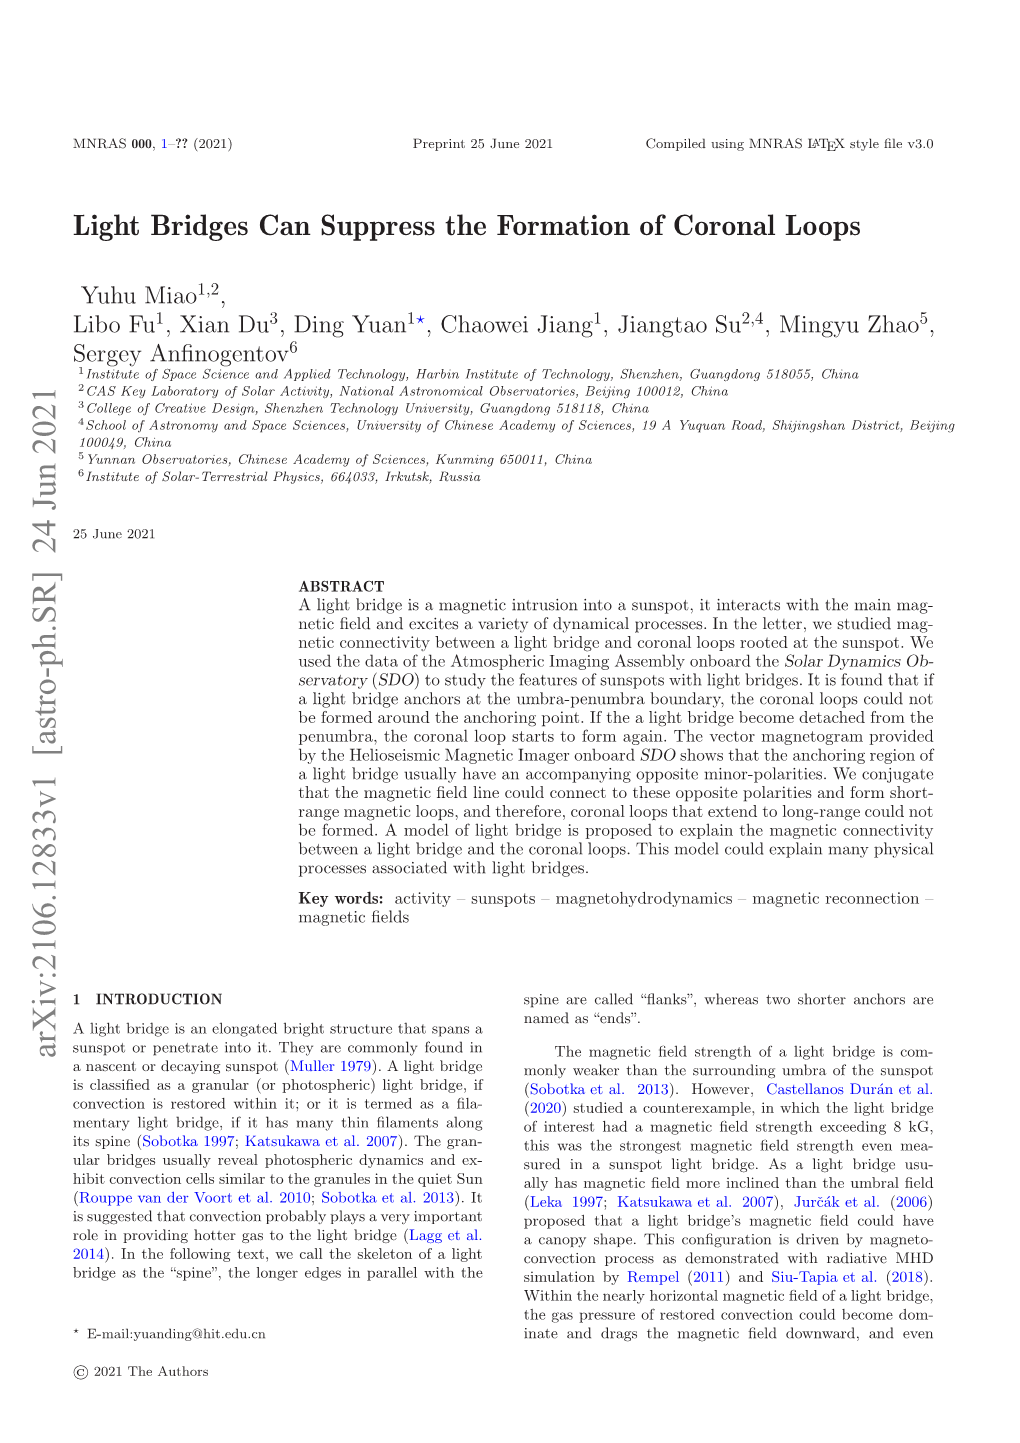 Light Bridges Can Suppress the Formation of Coronal Loops